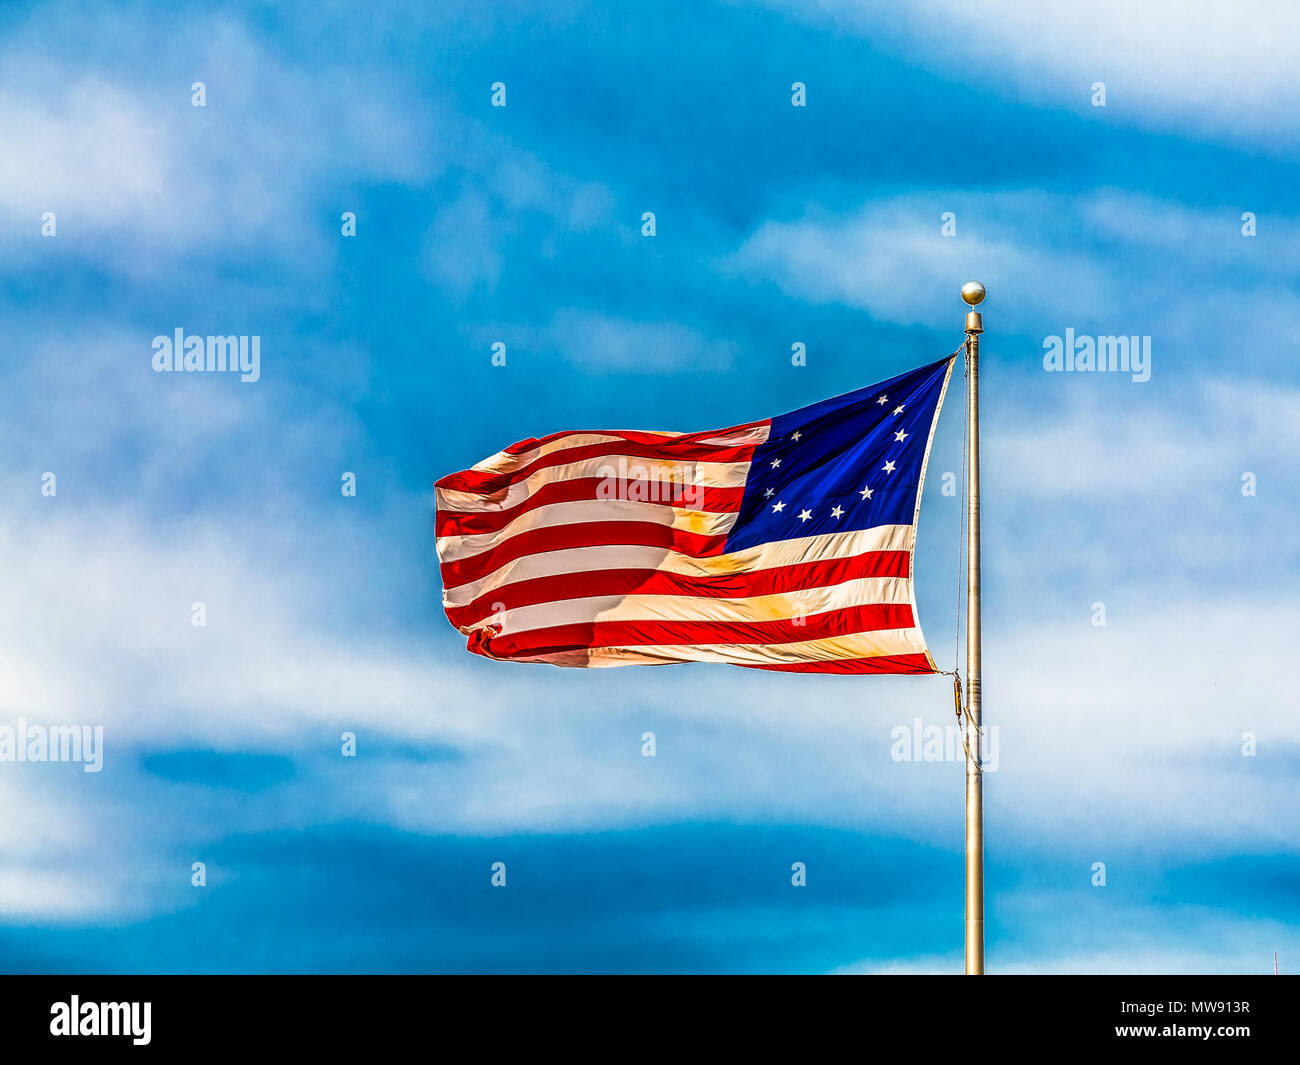 Original American flag showing stars for the thirteen colonies Stock Photo